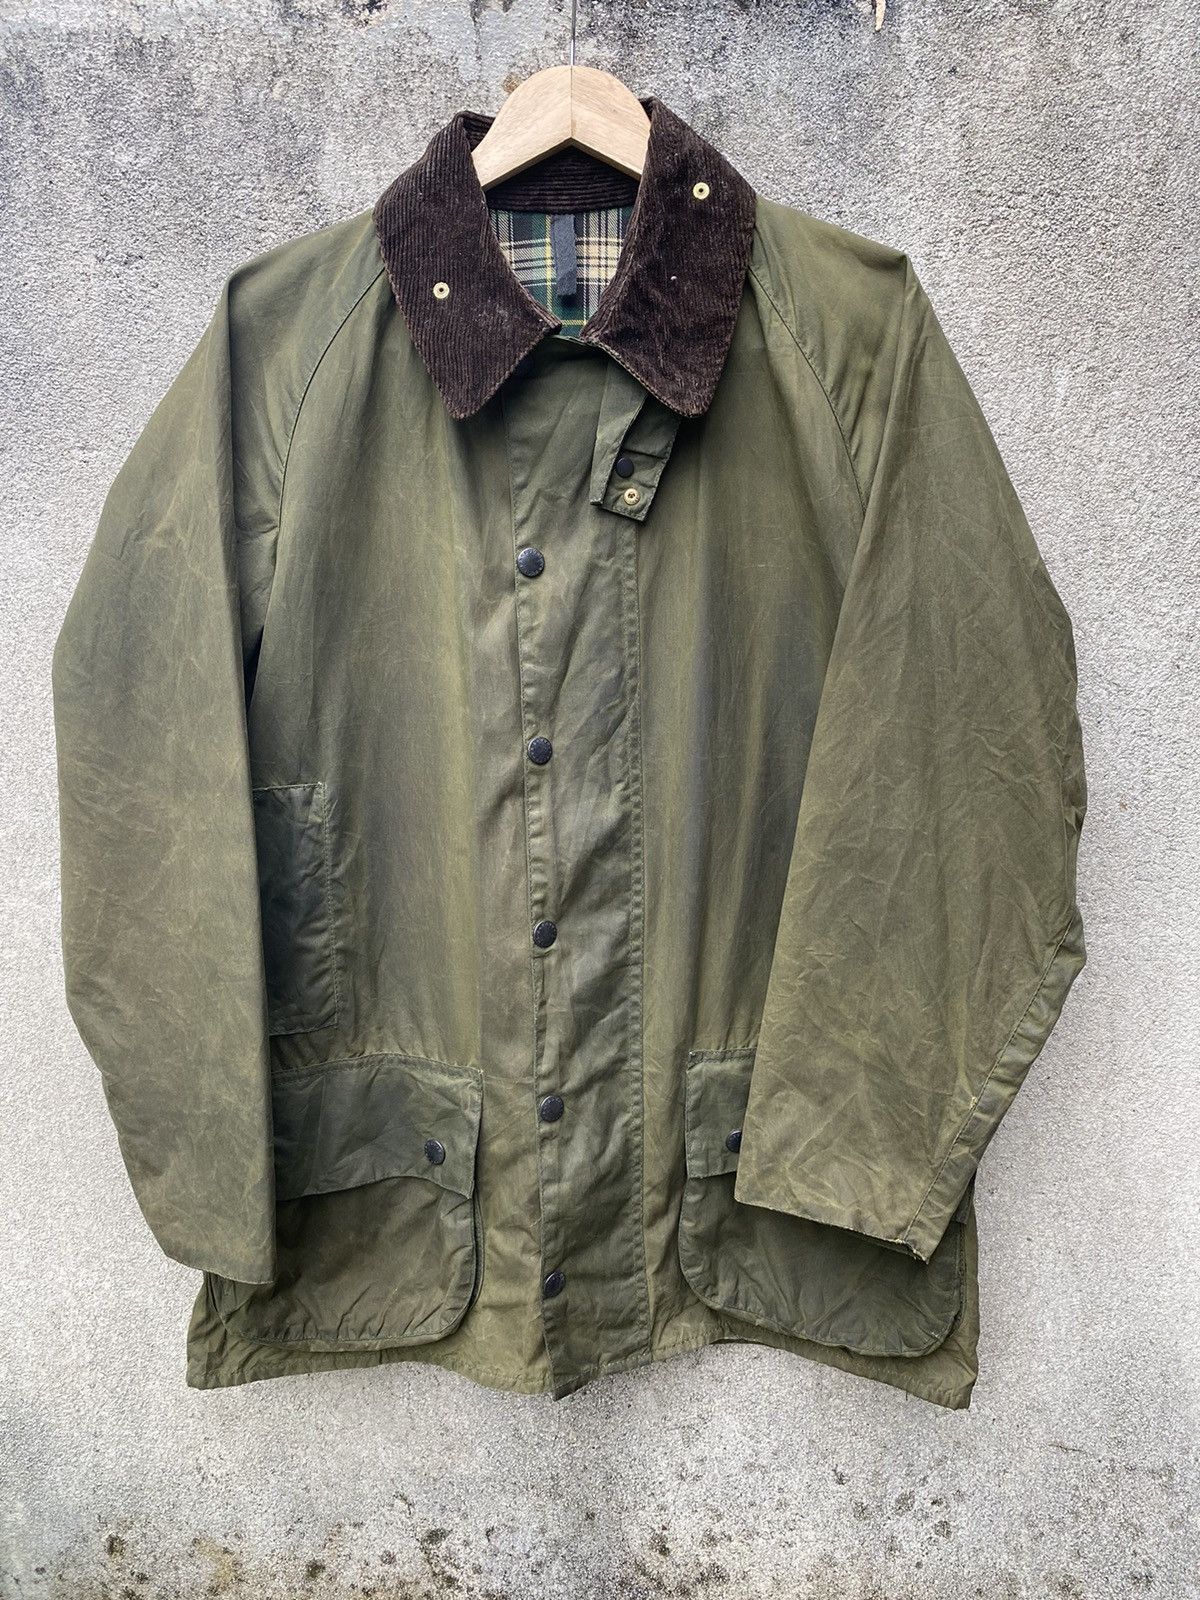 🏴󠁧󠁢󠁥󠁮󠁧󠁿 Barbour Beaufort Waxed Classic Jacket Made In England - 2